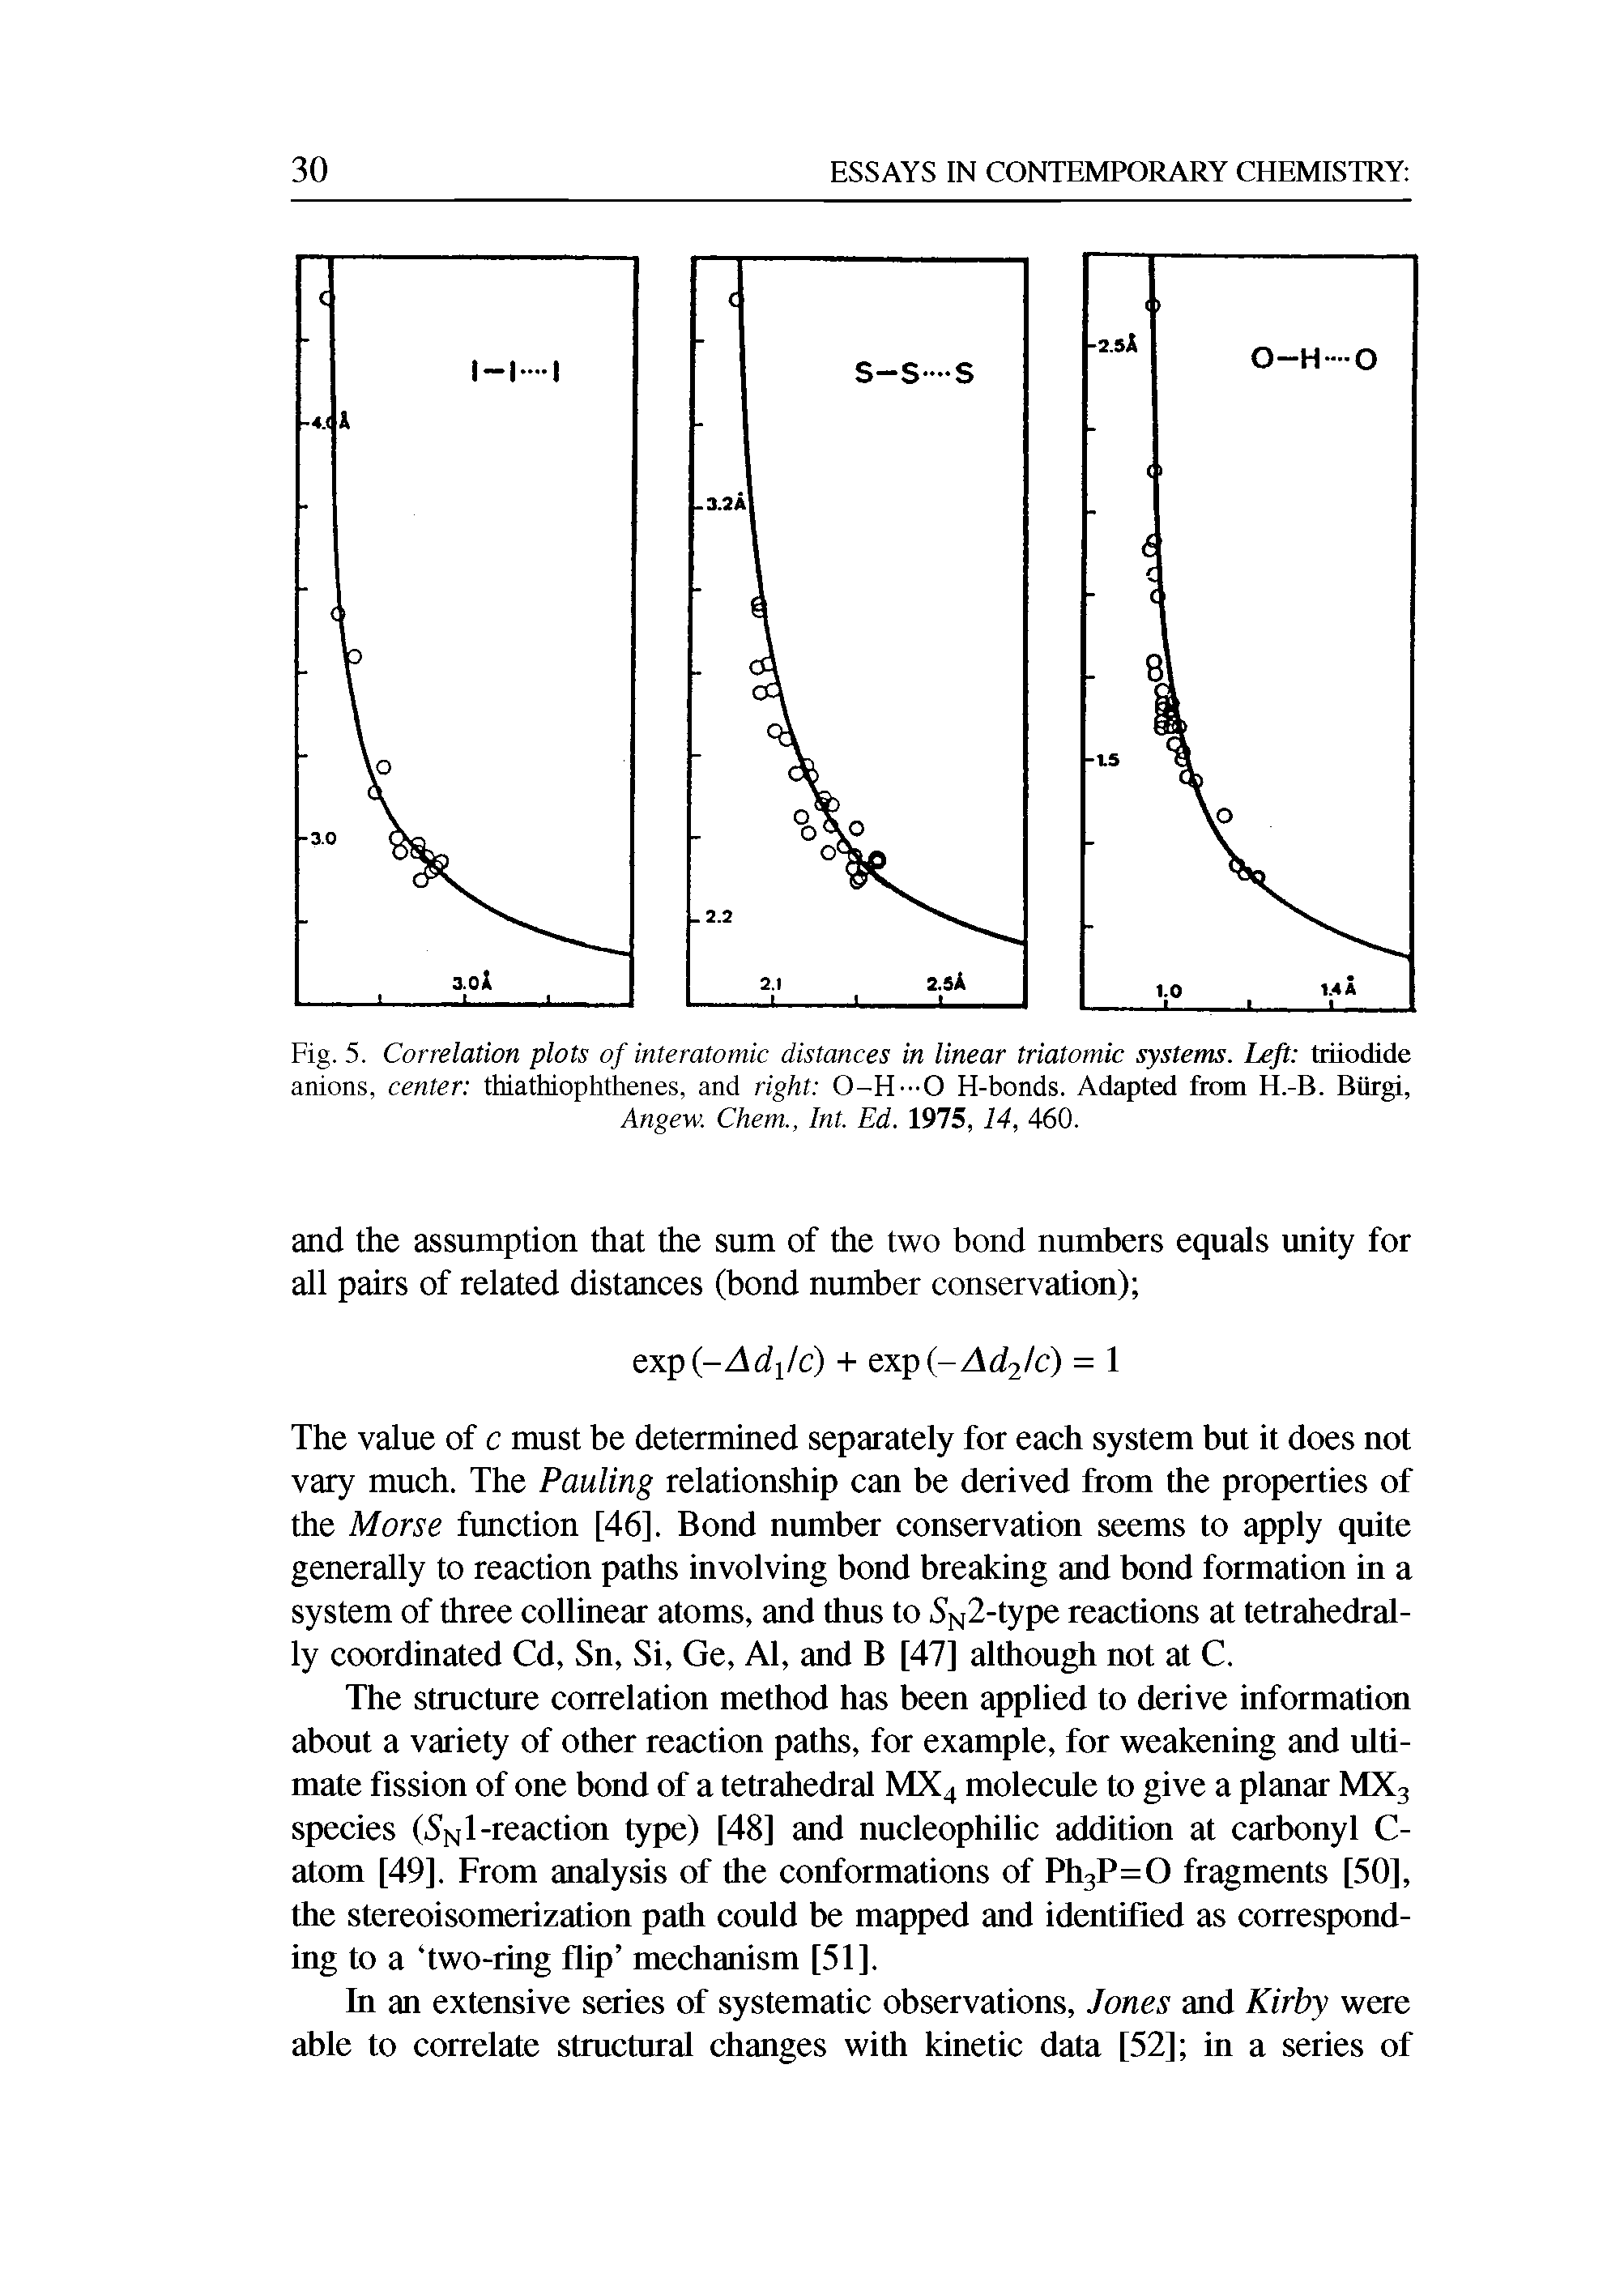 Fig. 5. Correlation plots of interatomic distances in linear triatomic systems. Left triiodide anions, center thiathiophthenes, and right O-H—O H-bonds. Adapted from H.-B. Biirgi, Angew. Chem., Int. Ed. 1975,14, 460.